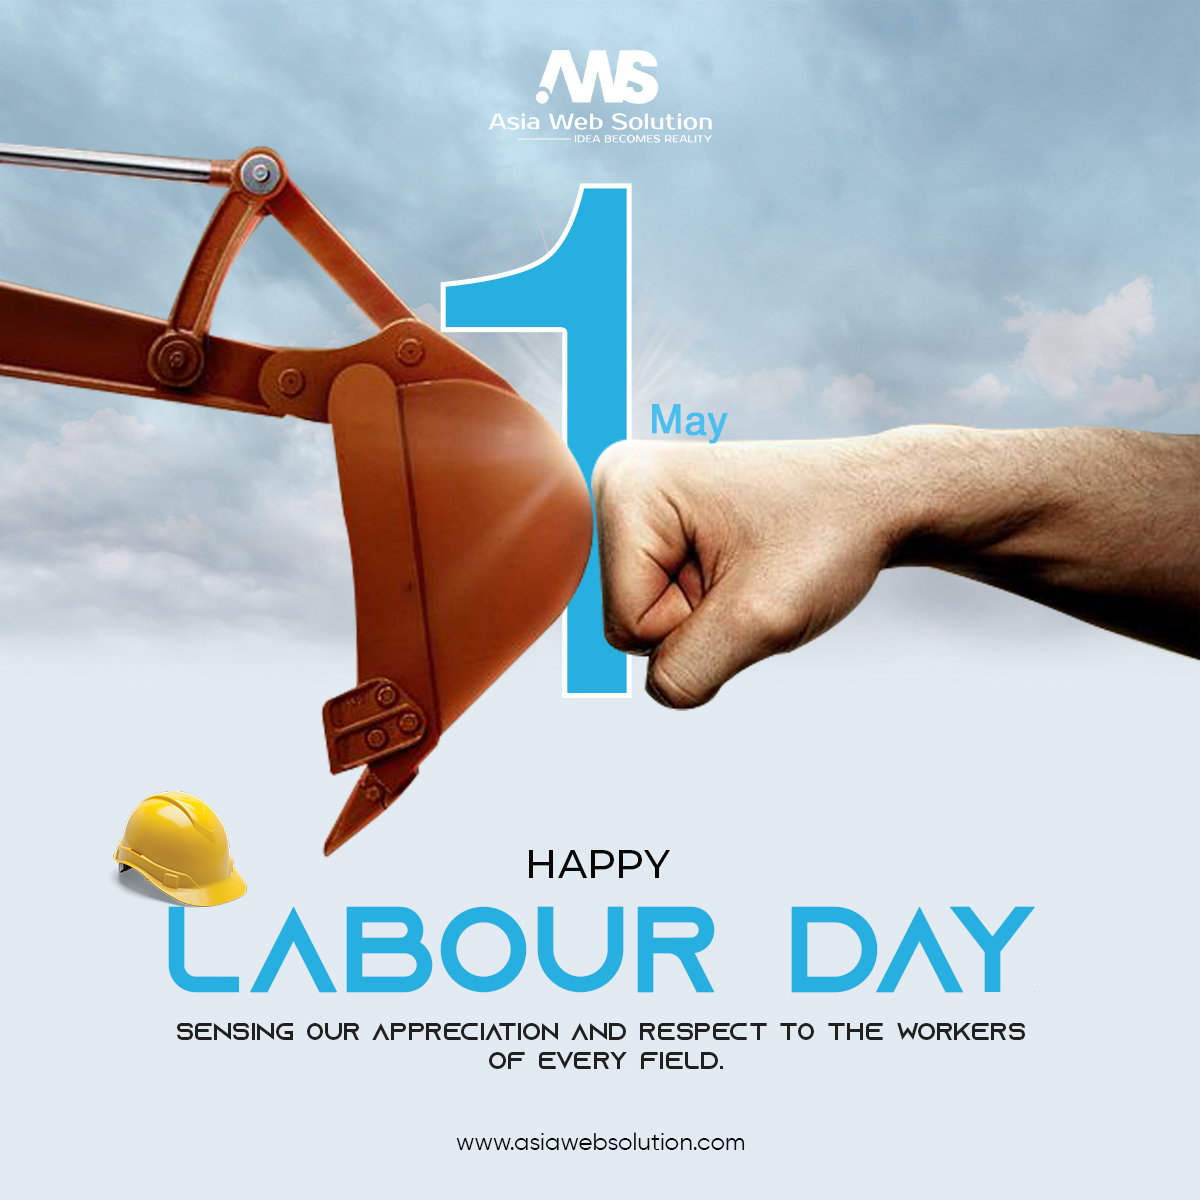 Happy Labor Day! Today, we celebrate the hard work, dedication, and achievements of workers around the world. #LabourDay #WorkersCelebration #MayDay #HardWorkPaysOff #DedicationPaysOff #WorkersUnited #AWS #asiasolution #asiawebsolution #websolution #solutionweb